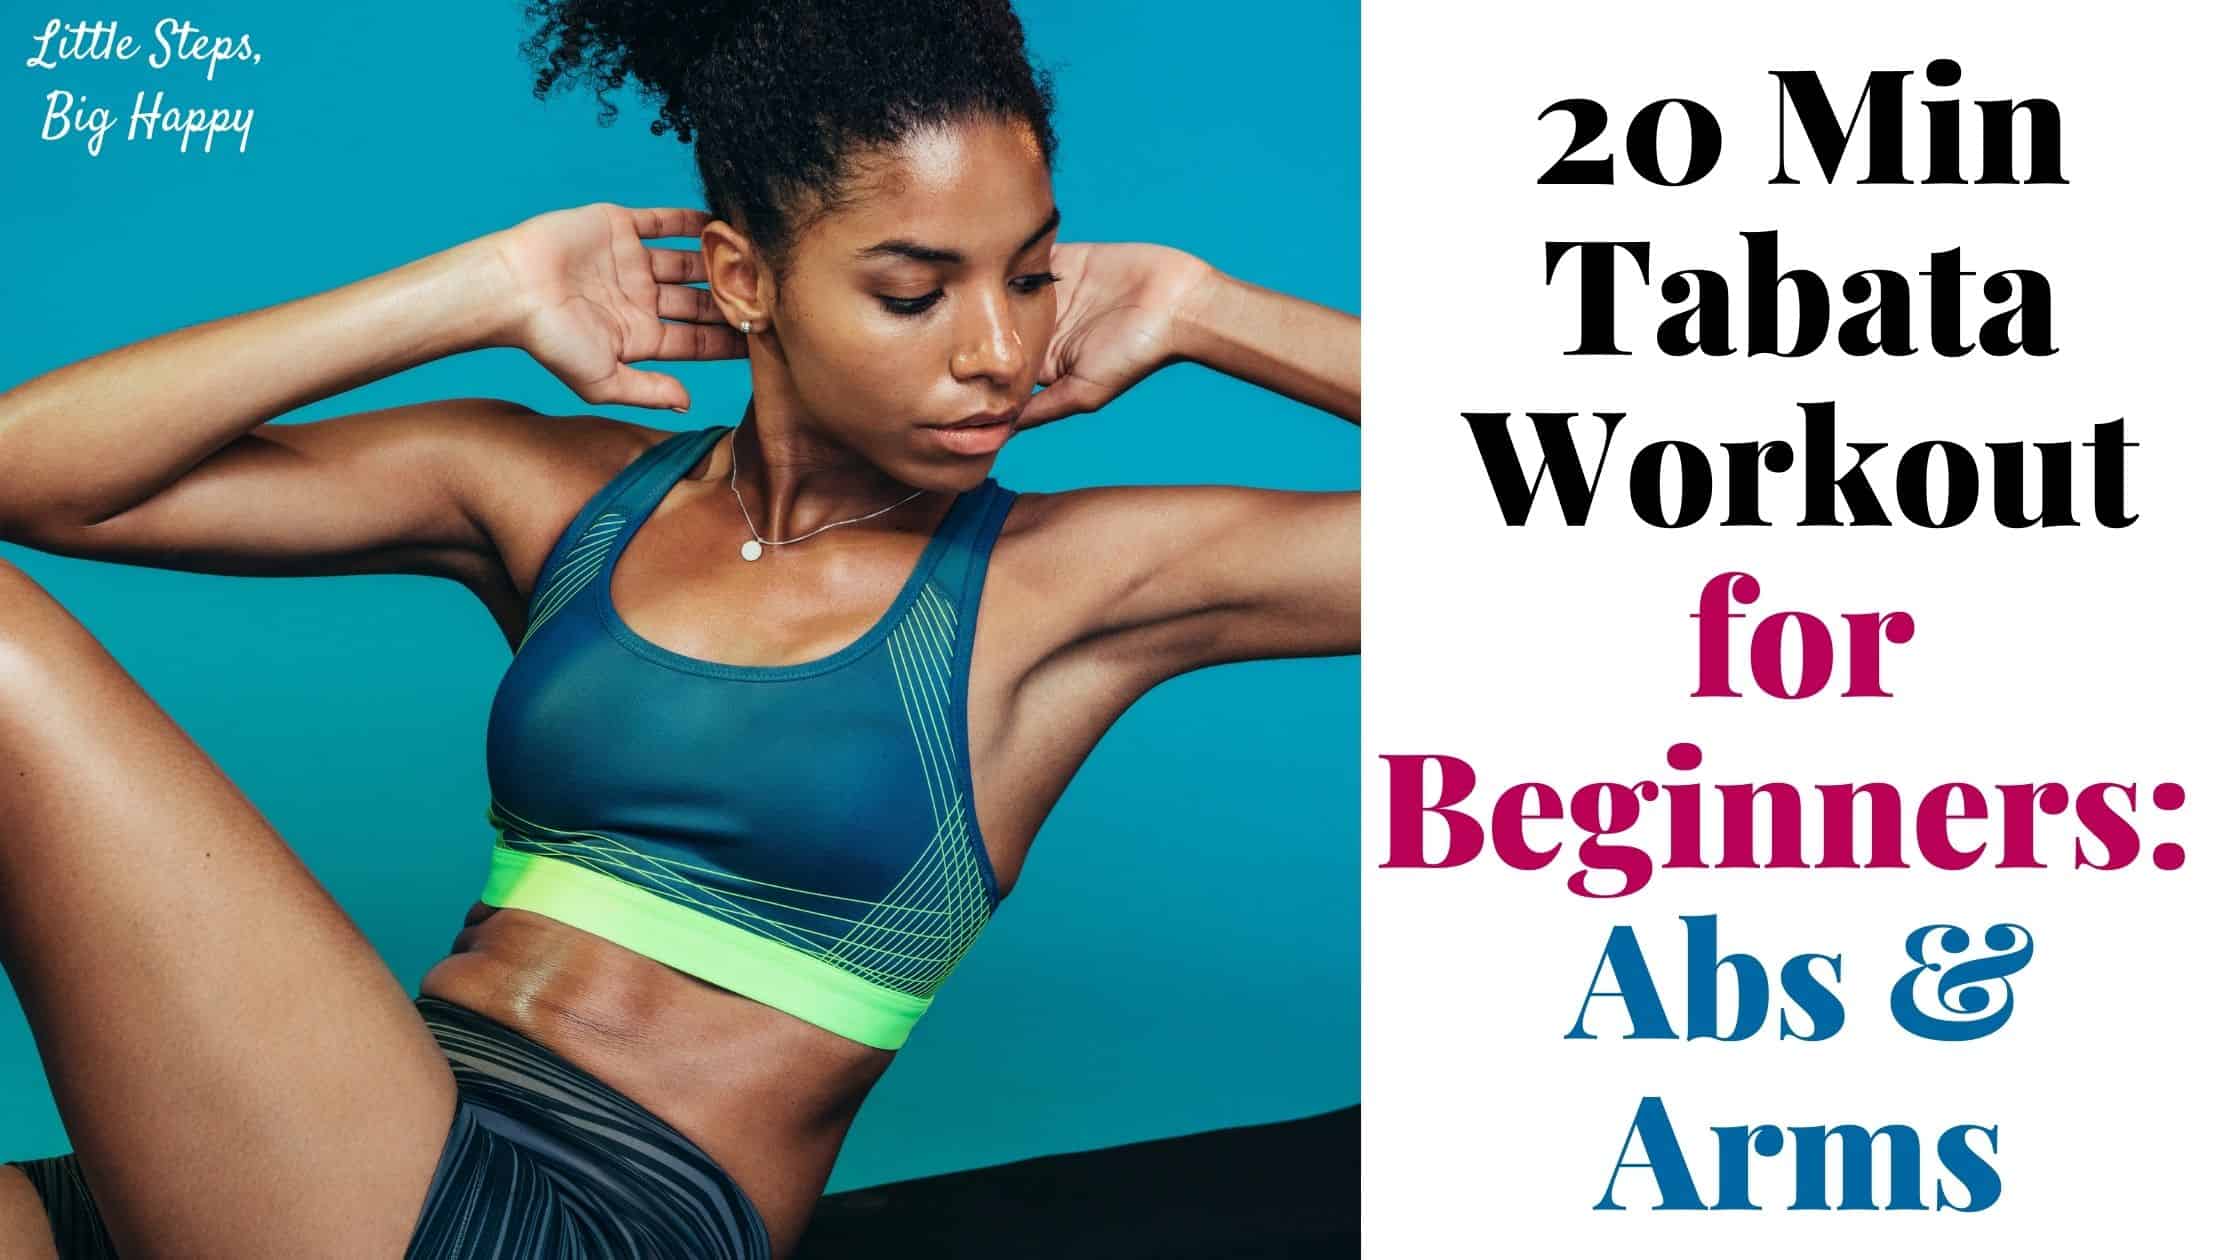 20 Min Tabata Workout for Beginners Abs & Arms